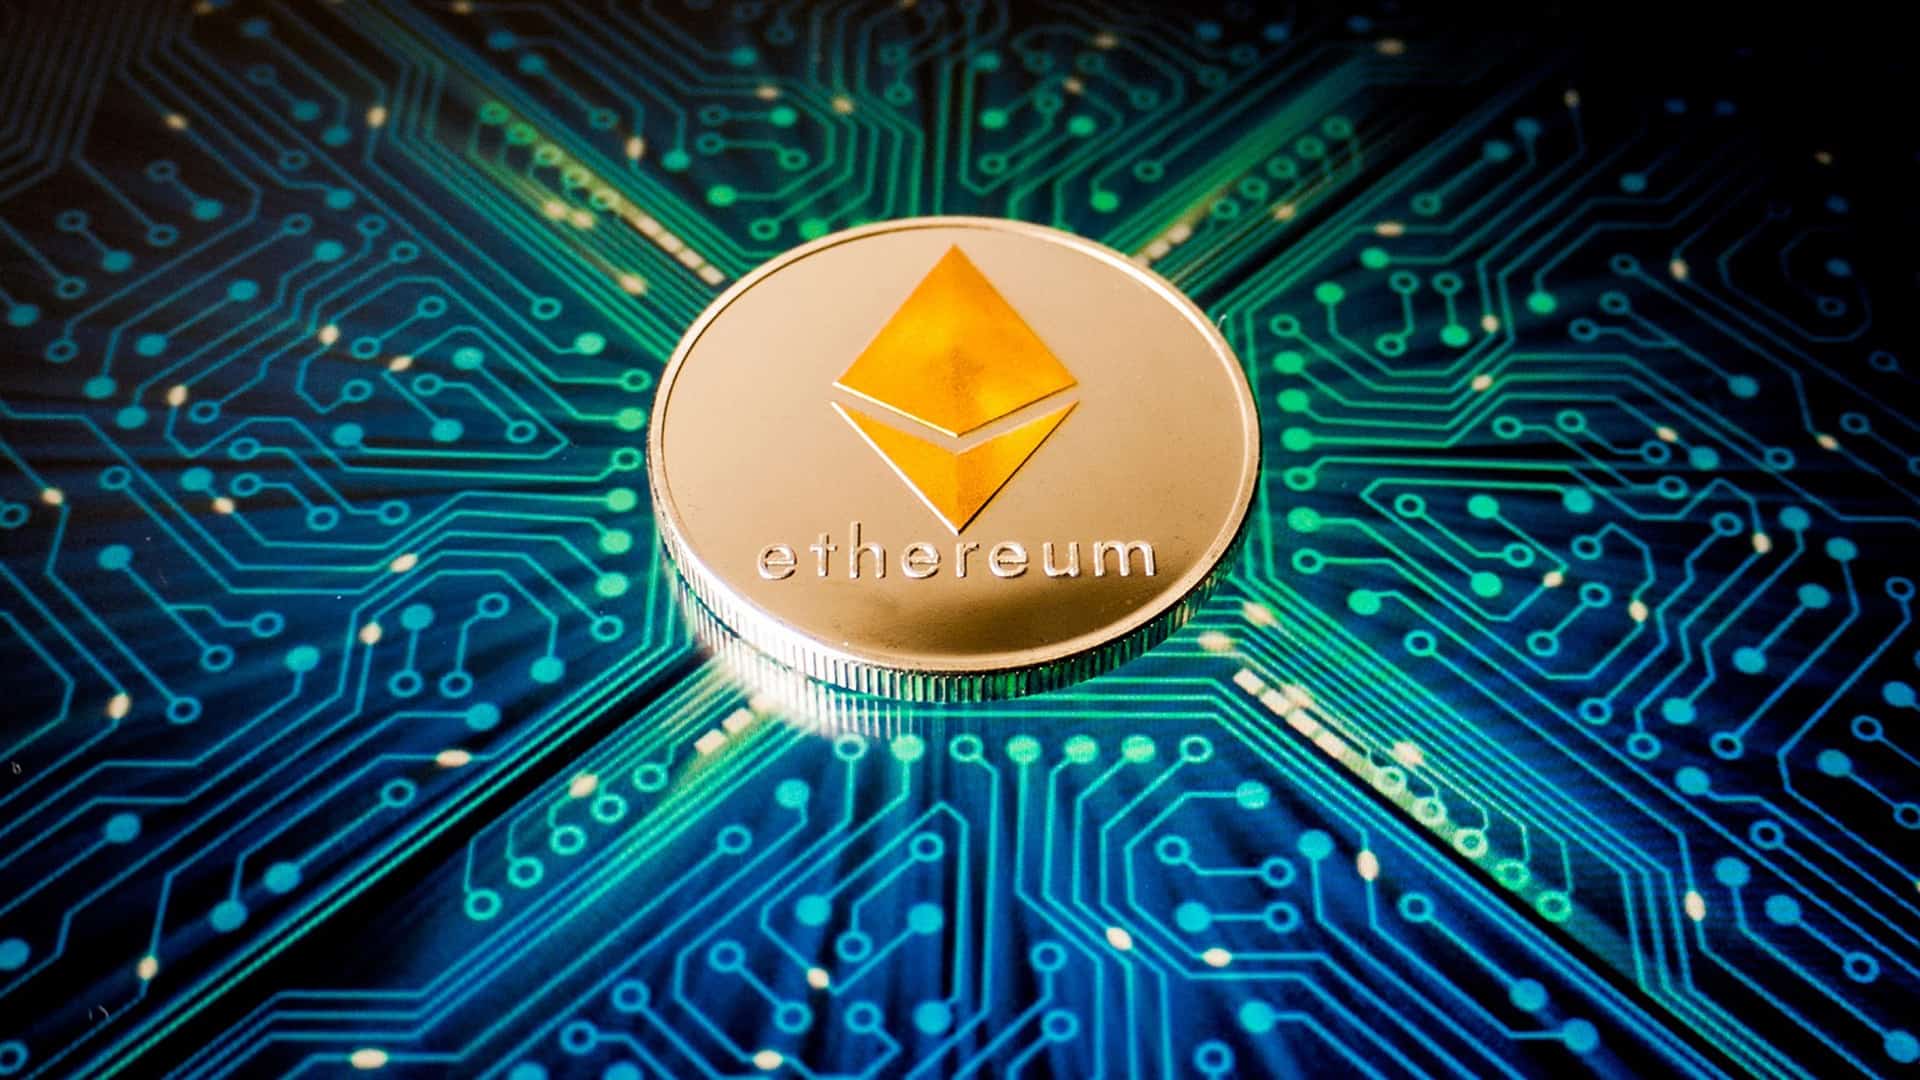 ethereum cyberpiracy The long-awaited Ethereum merge is finally happening as the developers have given a new launch date. On September 19, The Ethereum merge will happen that’ll change the network’s current state from Proof-of-Work (PoW) to Proof-of-Stake (PoS).